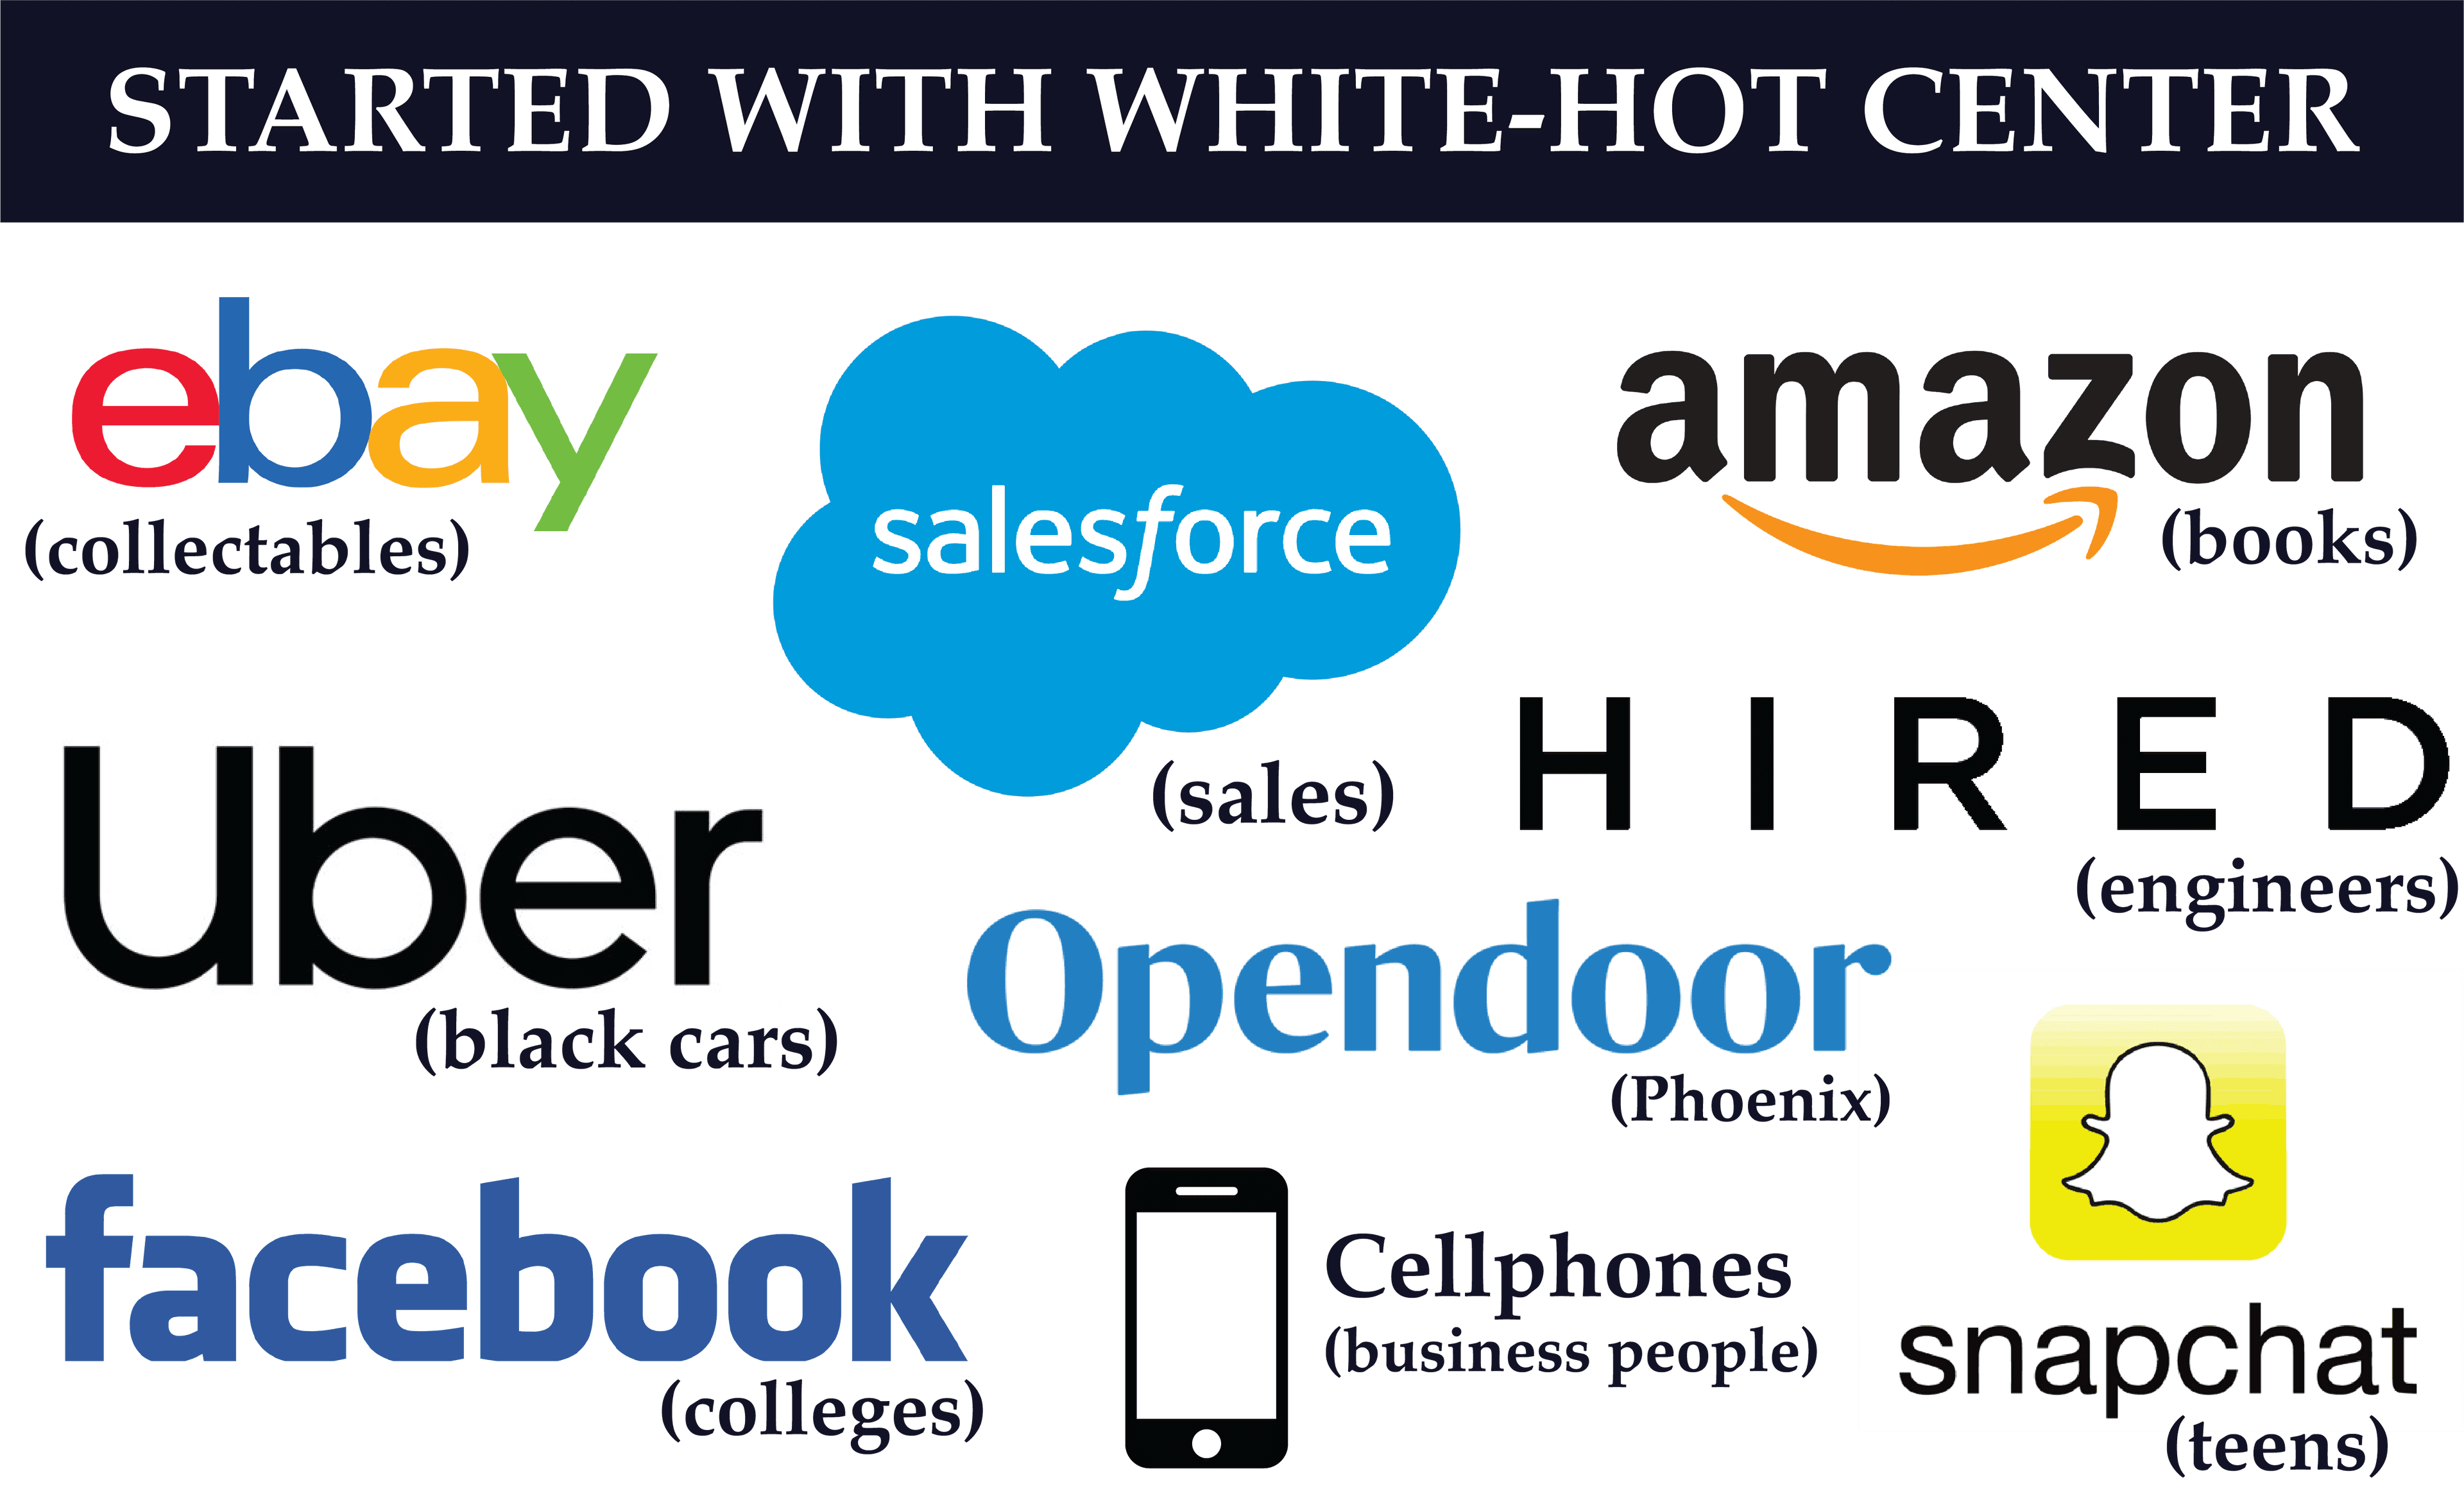 Examples of companies that started with the white-hot center